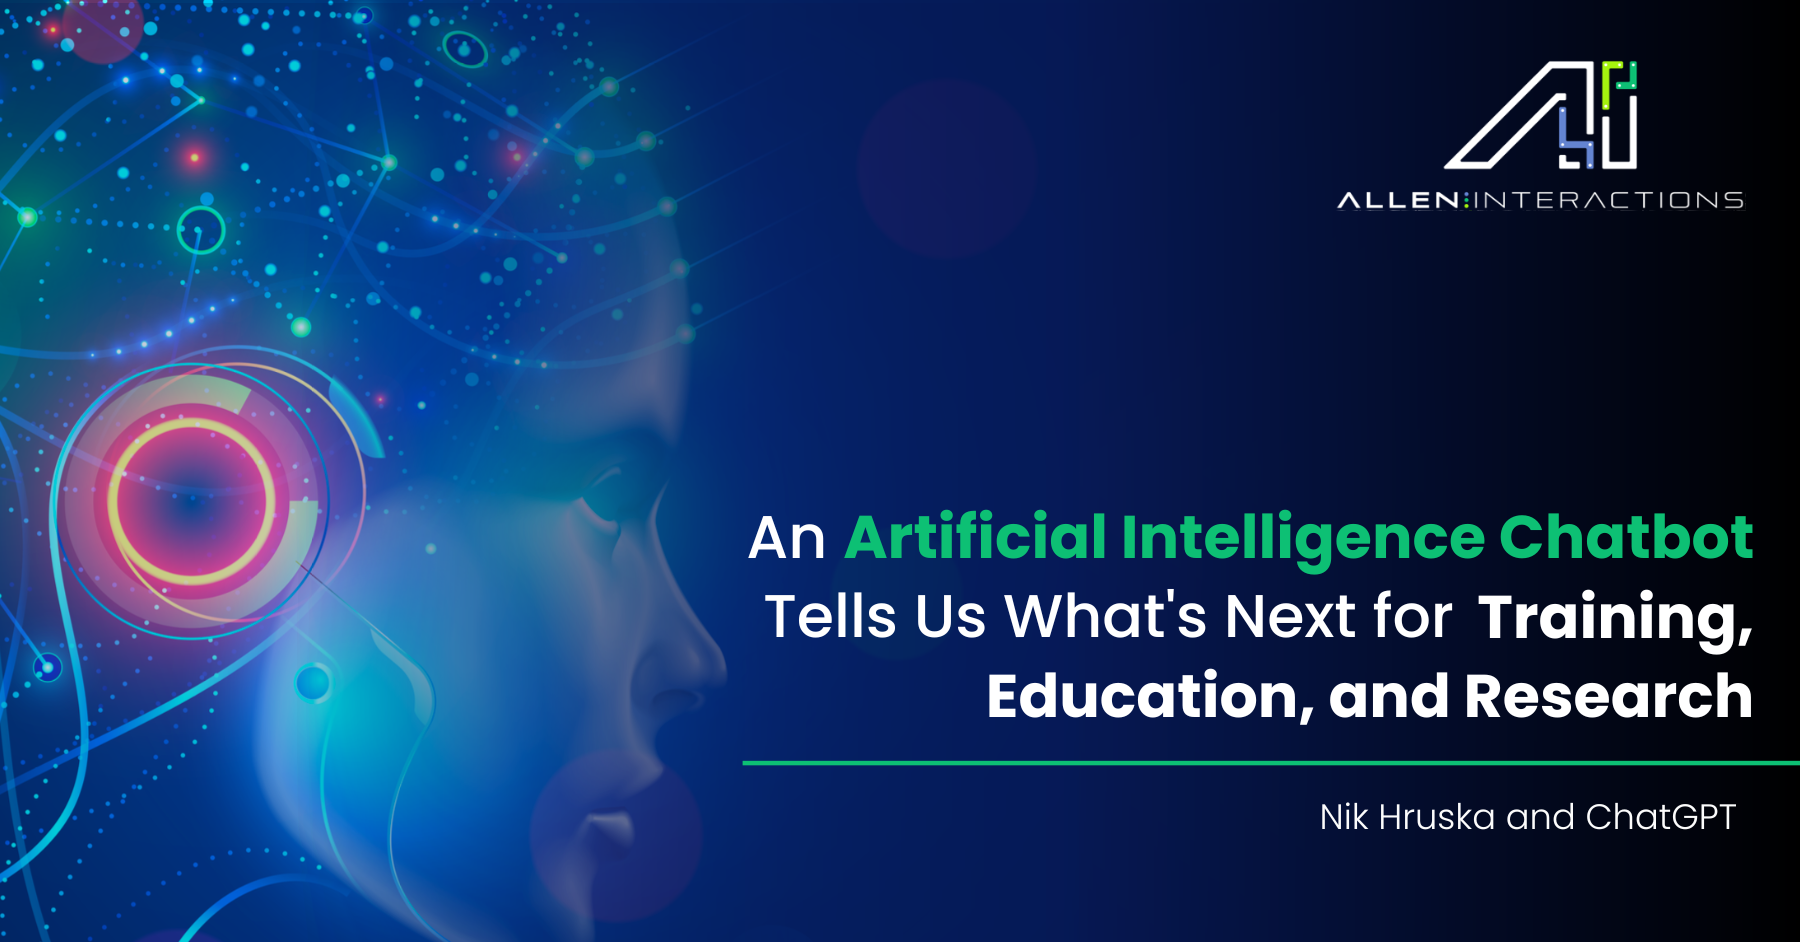 An Artificial Intelligence Chatbot Tells Us What's Next for Training, Education, and Research